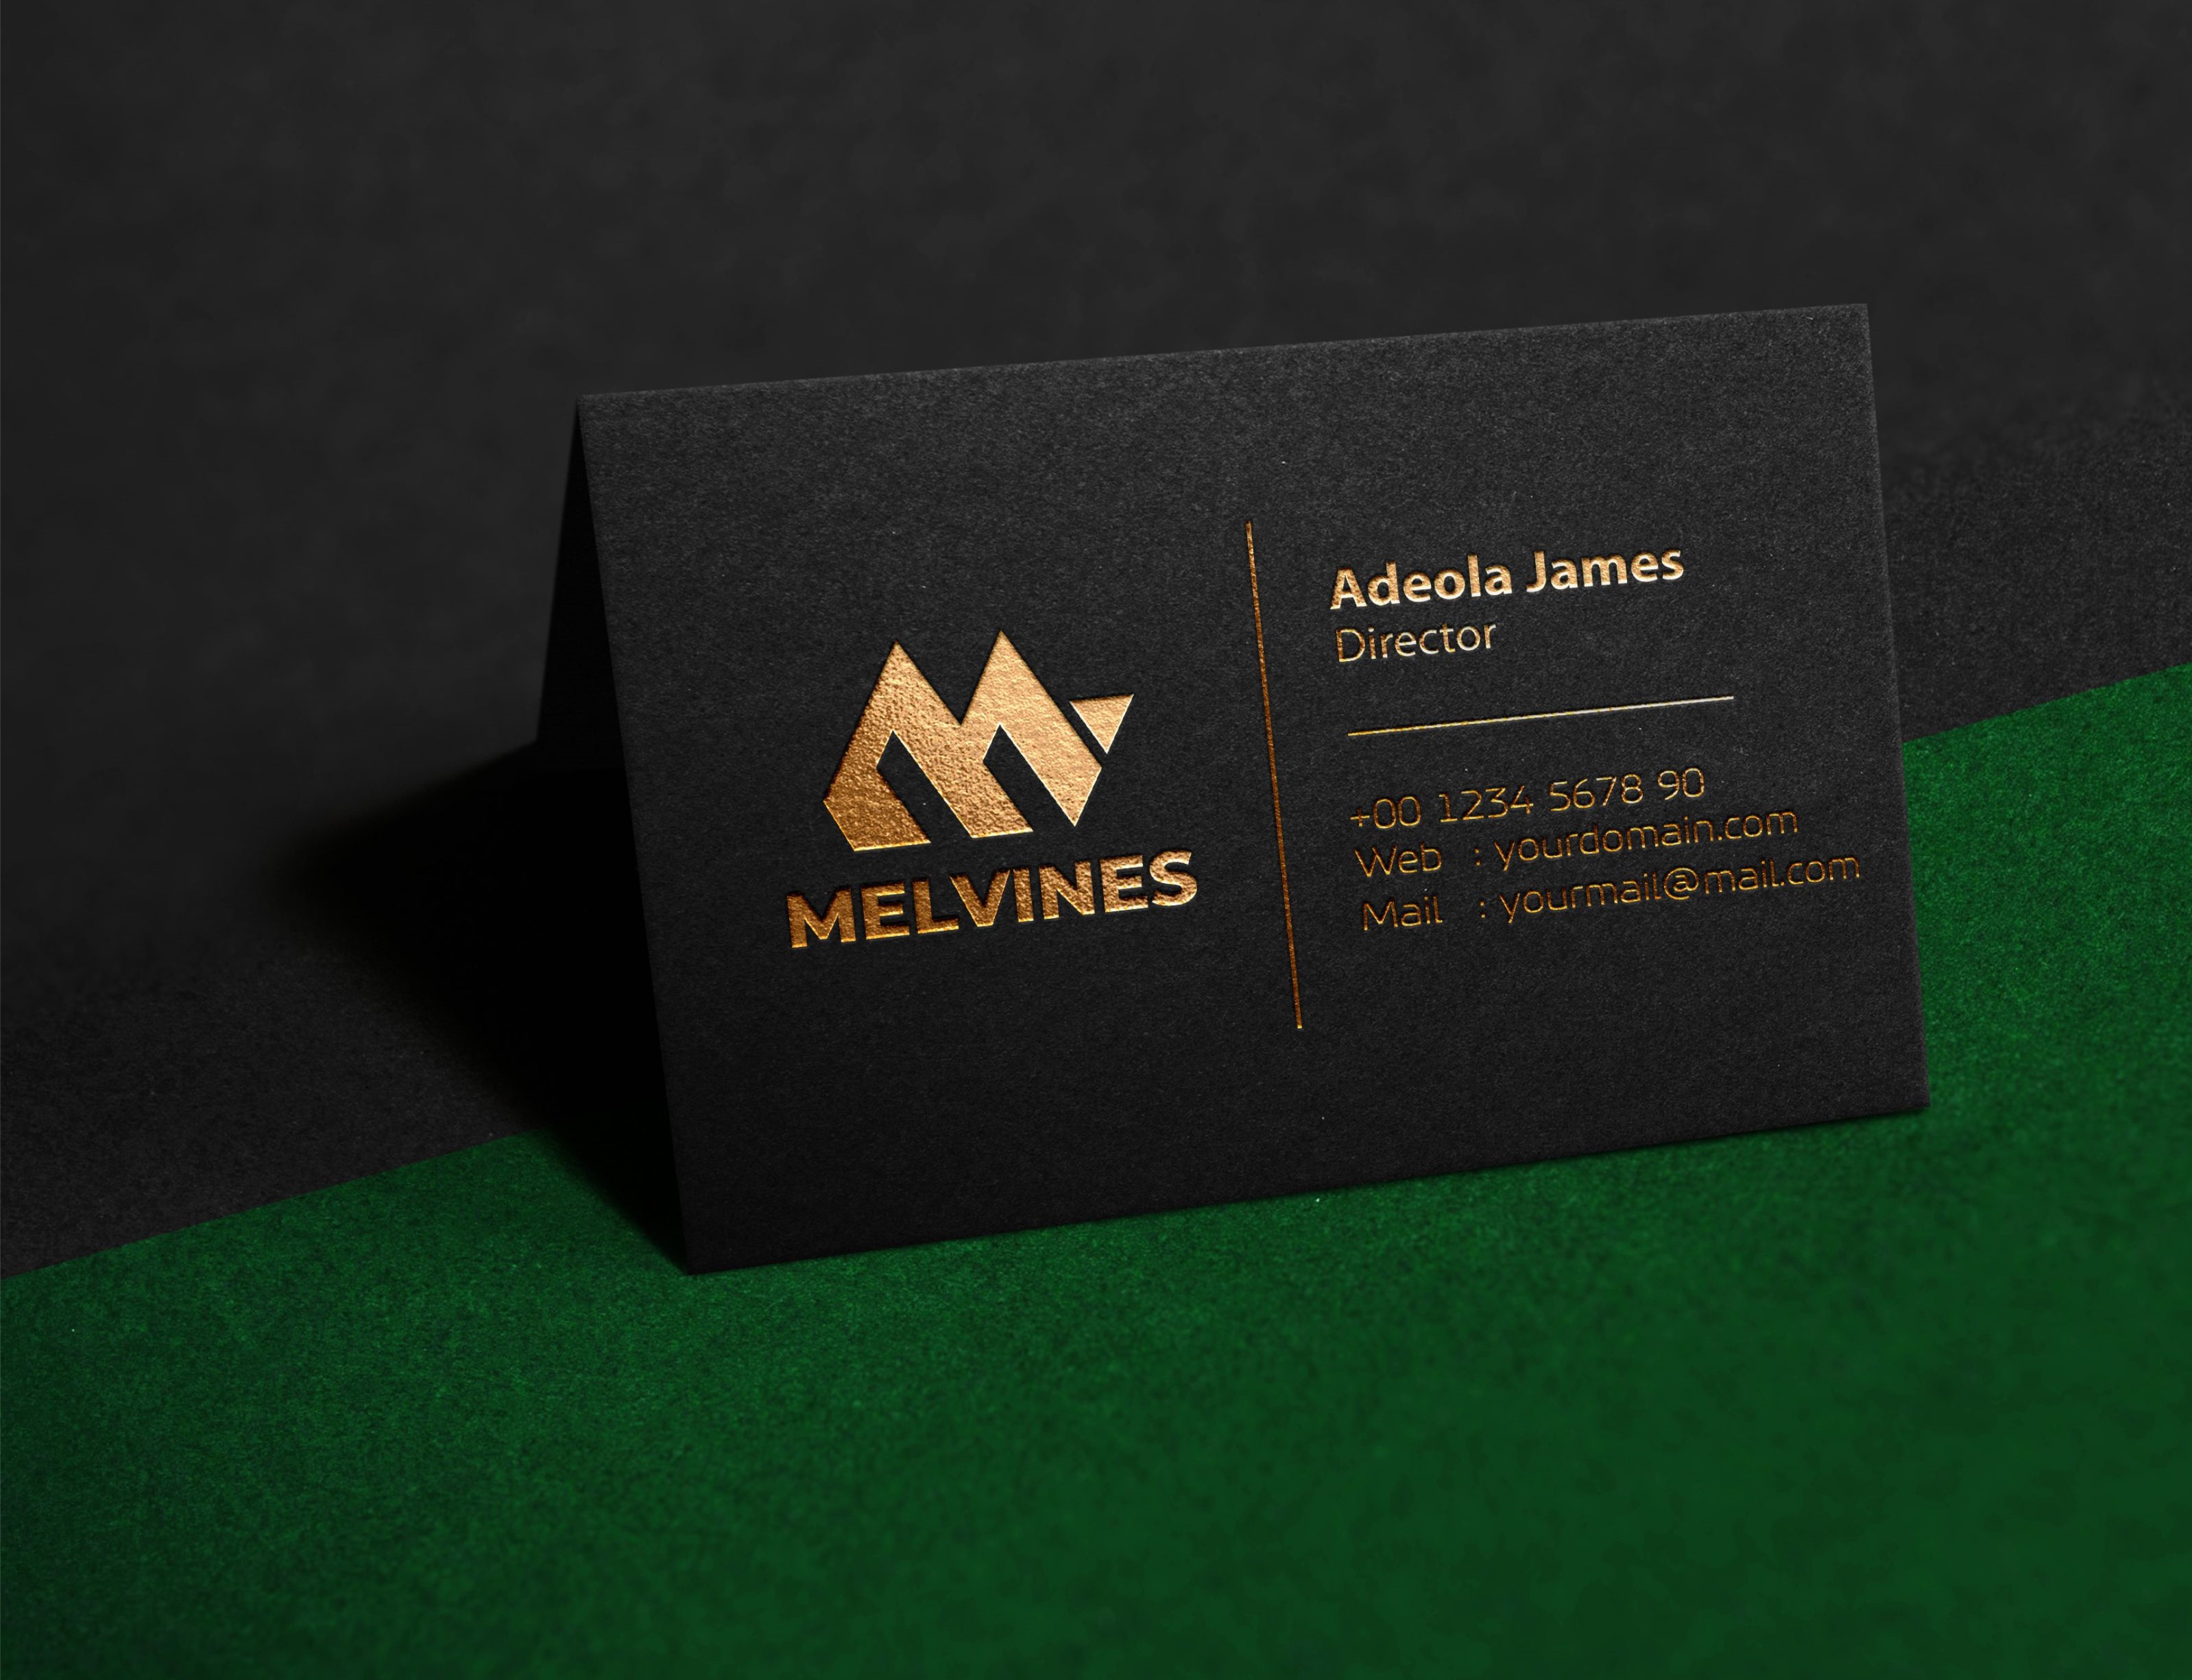 Best quality gold-foil-business card design and printing in lagos nigeria